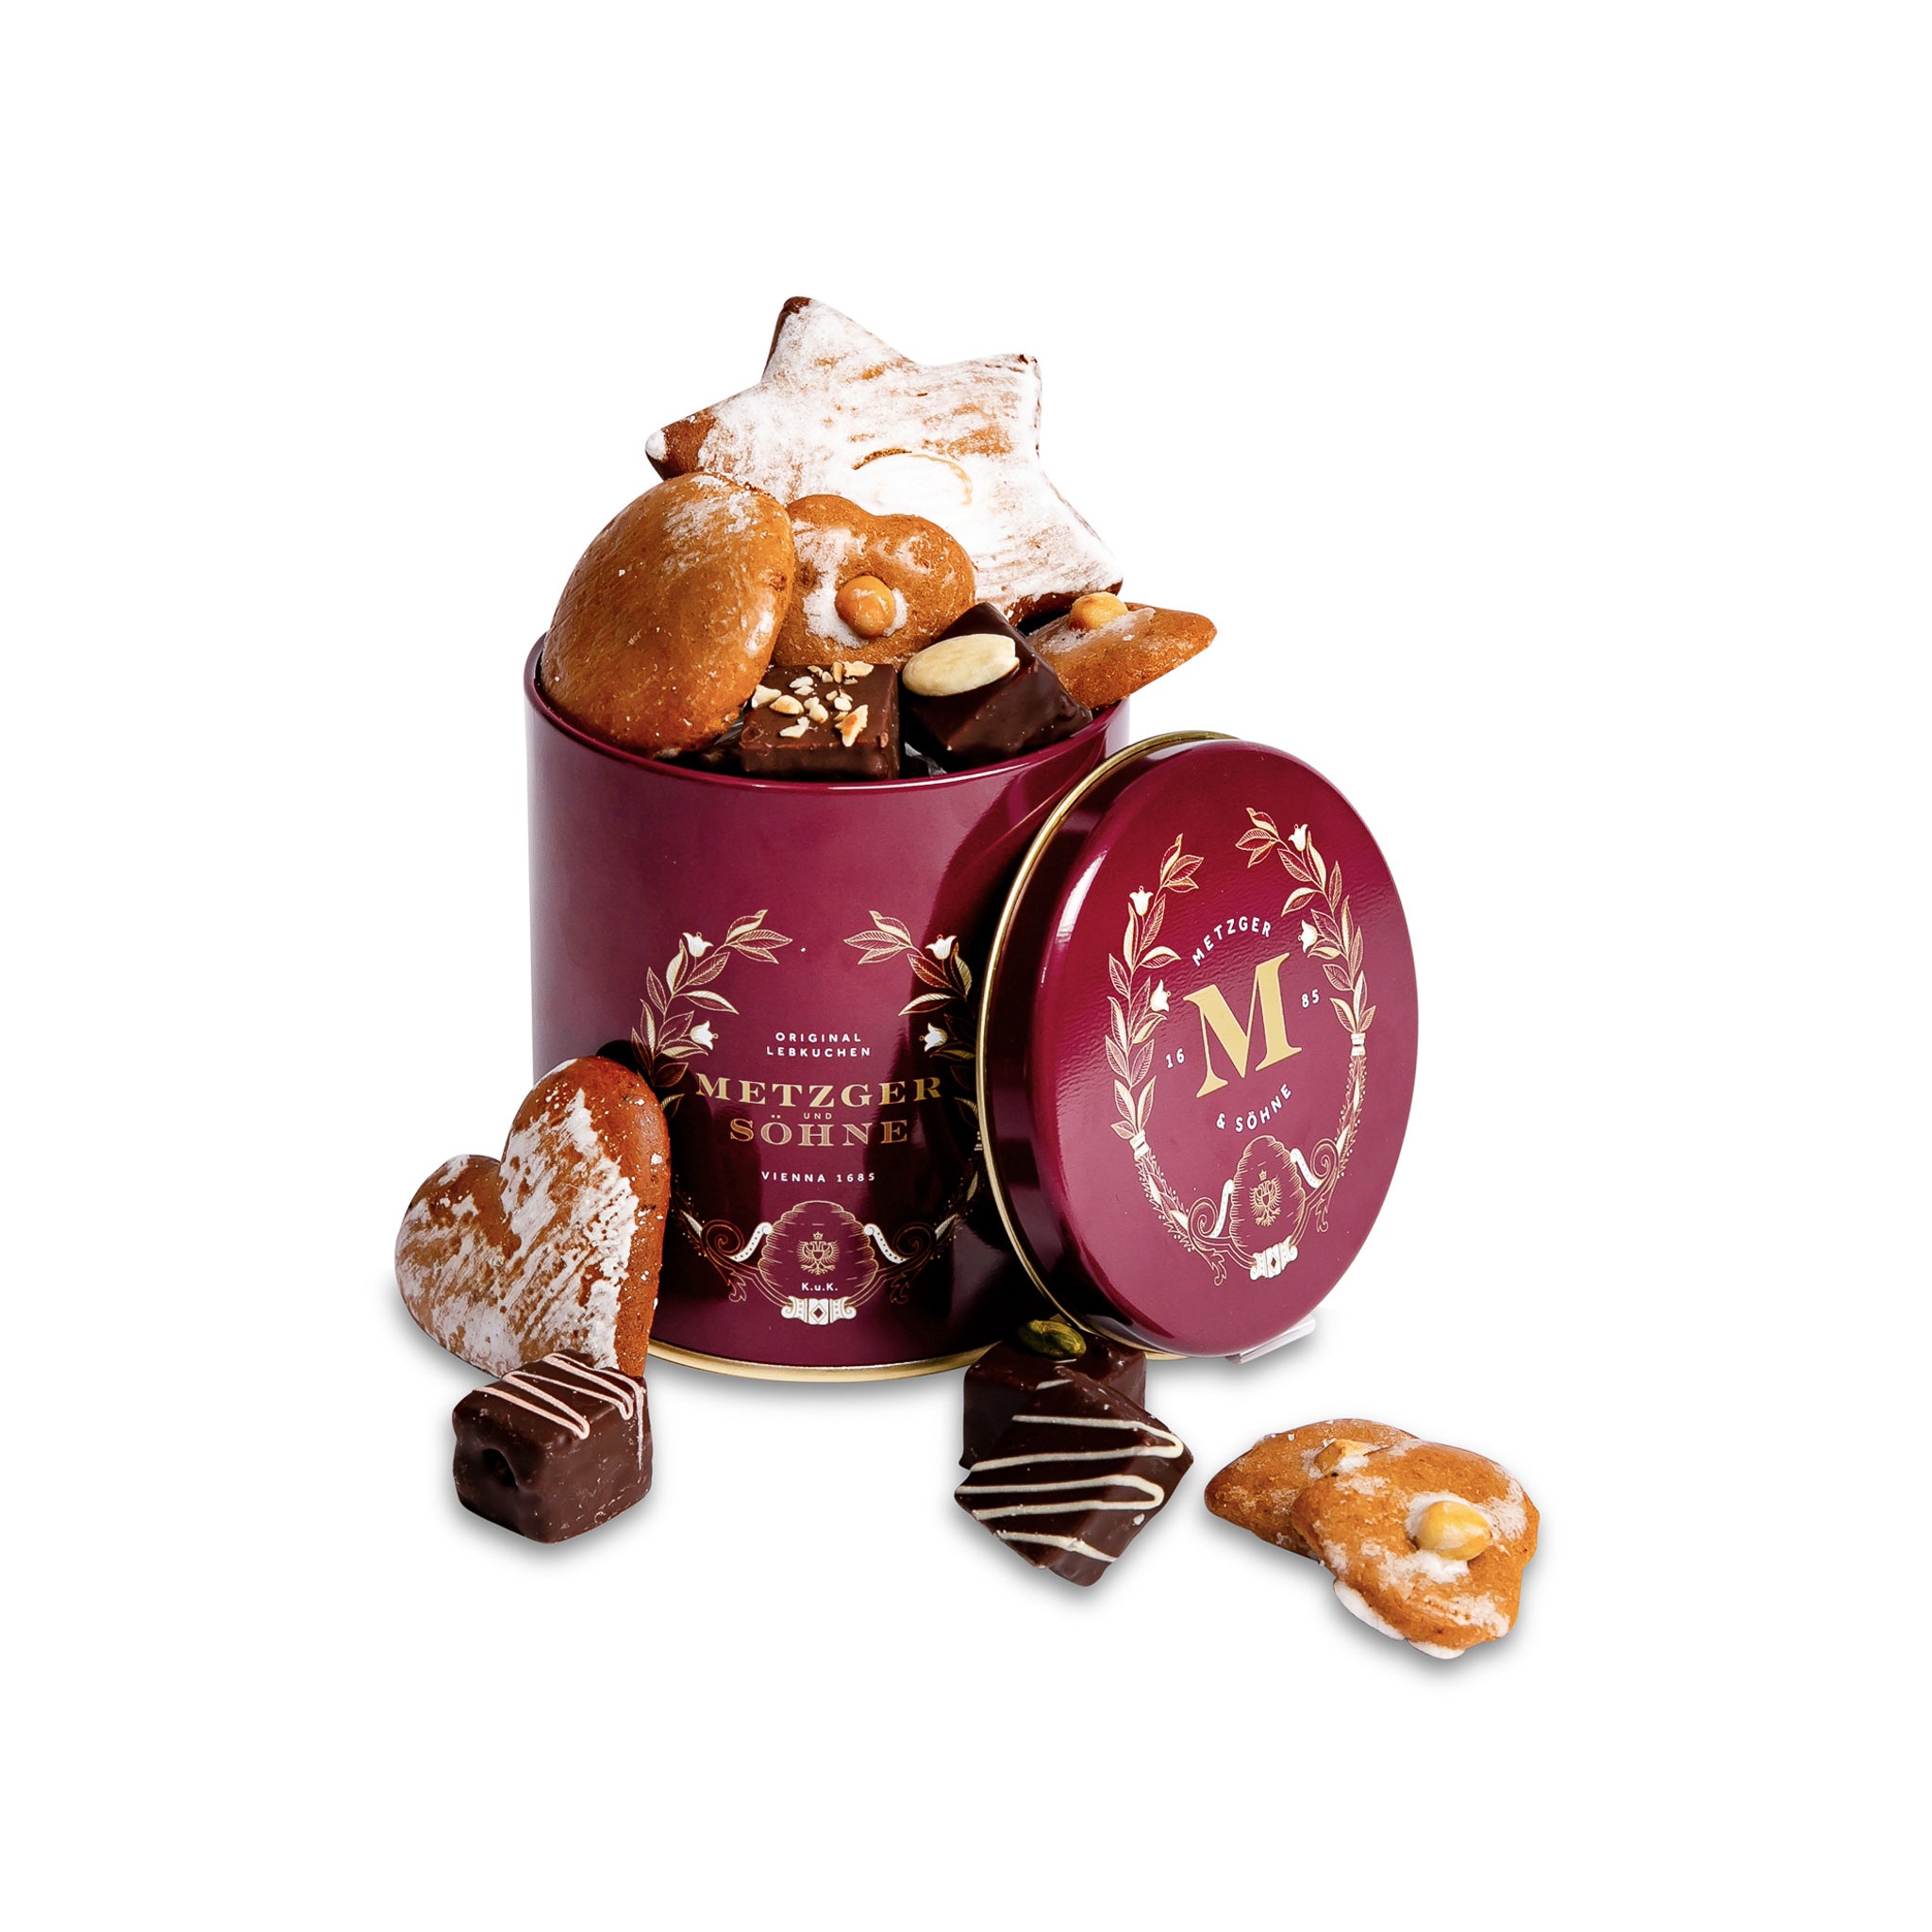 Luxury Metzger gift tin in red, filled with our popular Lebkuchen cookies and chocolate pralines. There are 10 opulent praline types, from marzipan mixes to fruit jellies, jams and nut fillings, coated in chocolate. The Lebkuchen cookies include our fruit bread with dried fruits and nuts, basler with a cherry undertone, chocolate robbins, signature house Lebkuchen and Aranzini Lebkuchen minis. A perfect Lebkuchen taster gift or selection for the Christmas table.